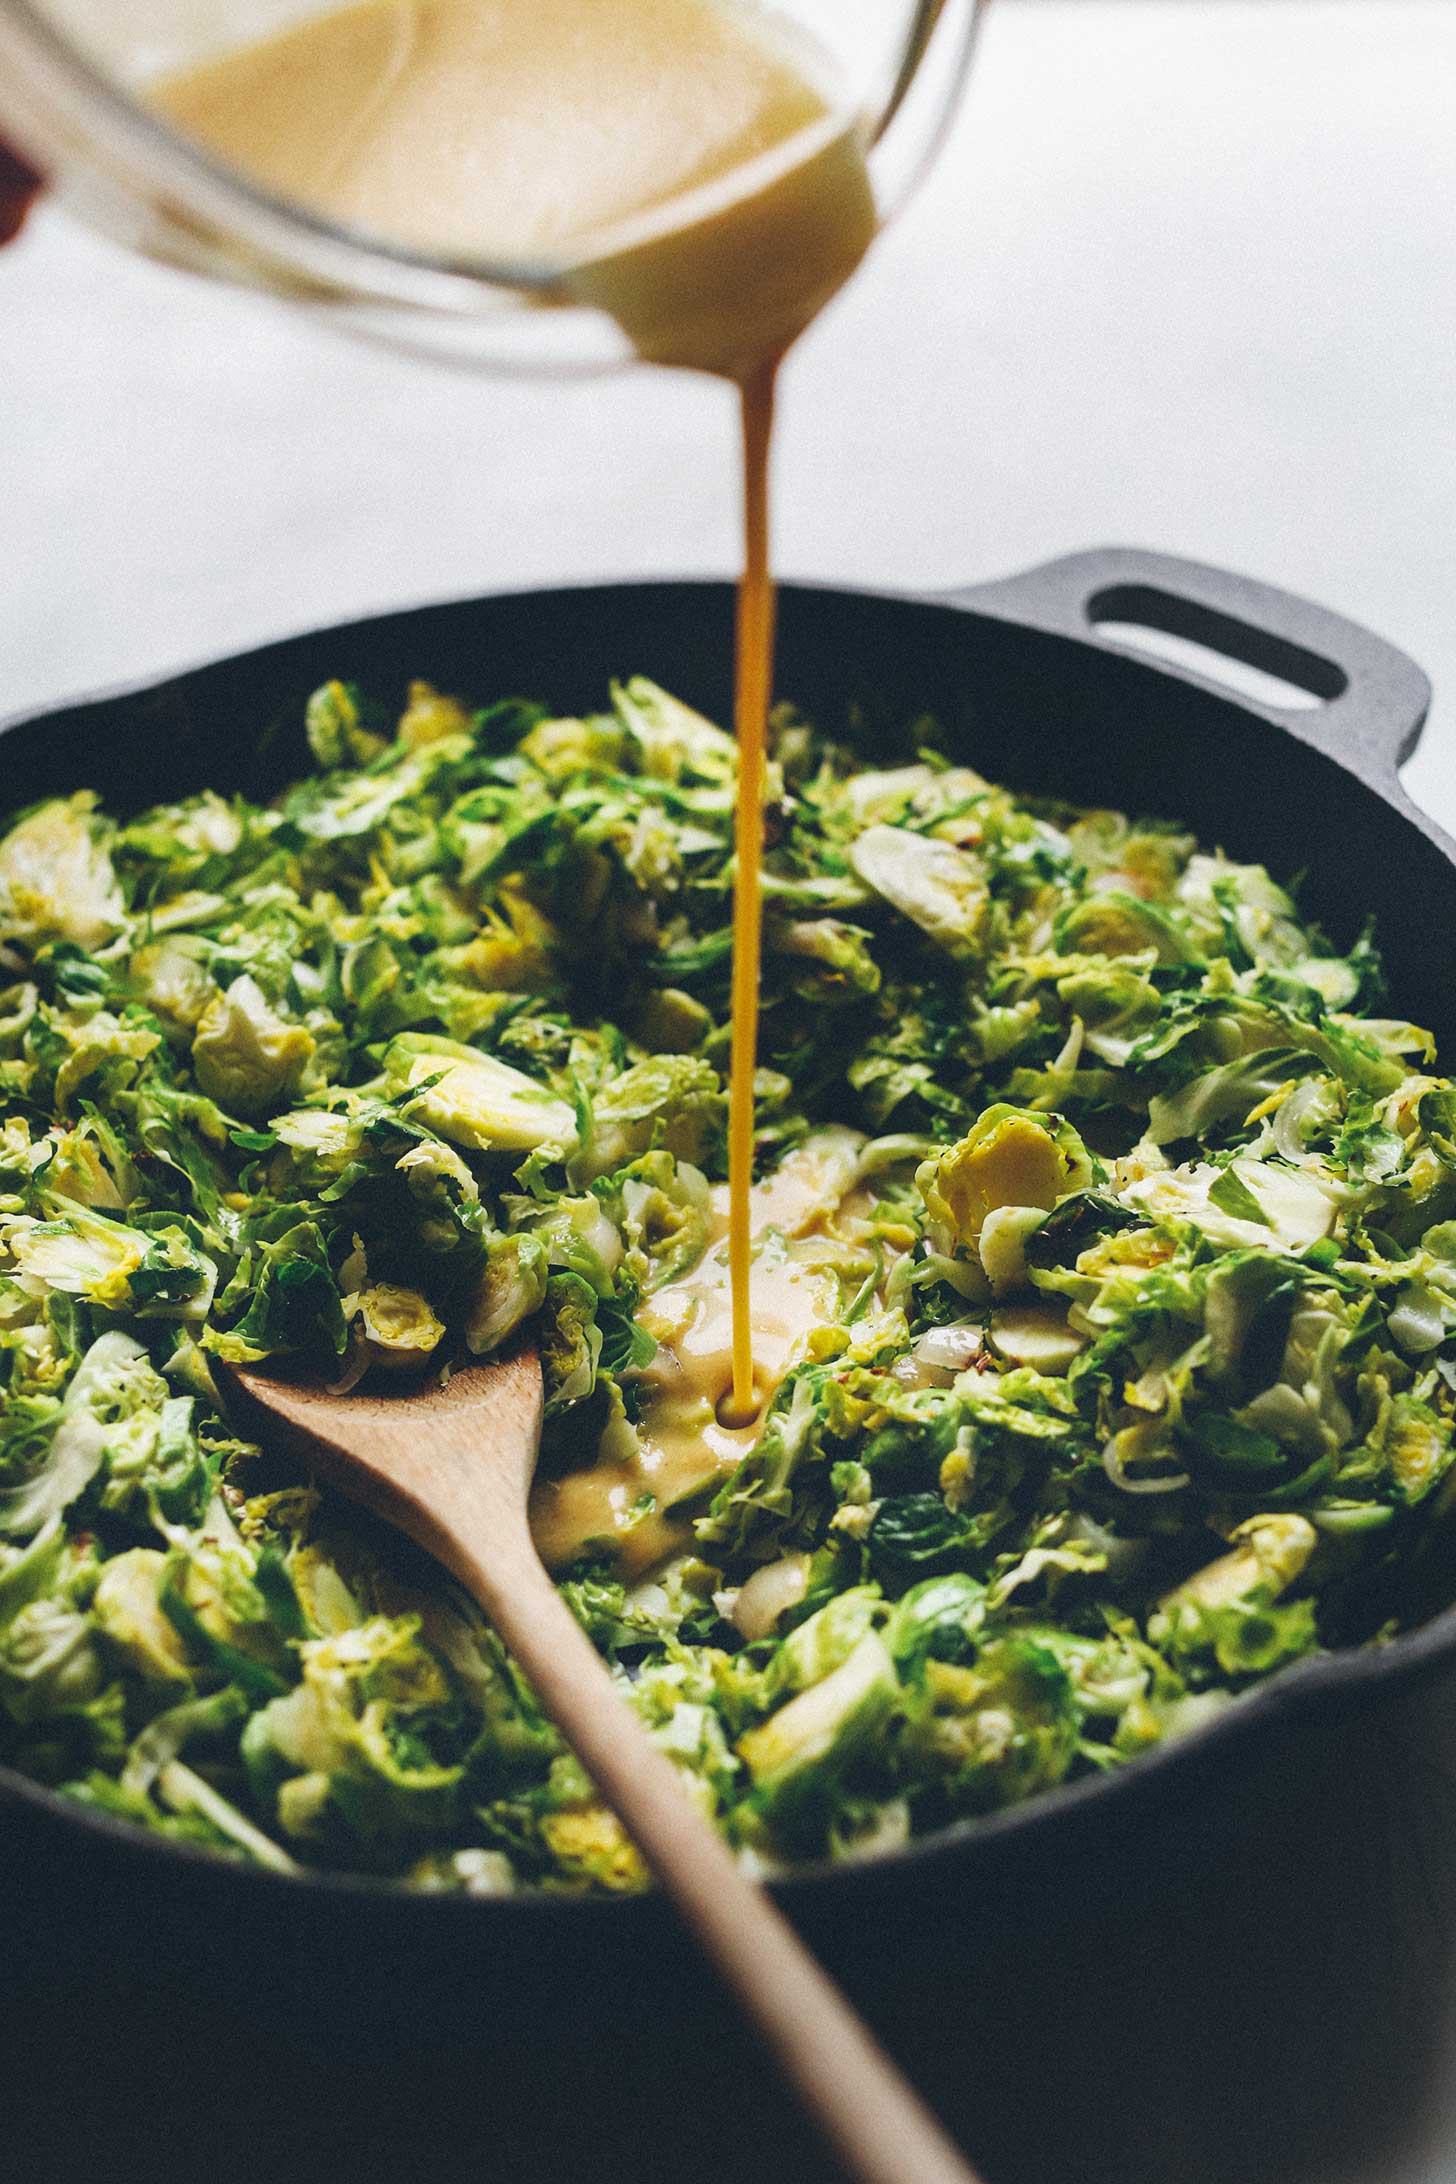 Pouring dressing over warm Brussels Sprouts in a cast-iron skillet